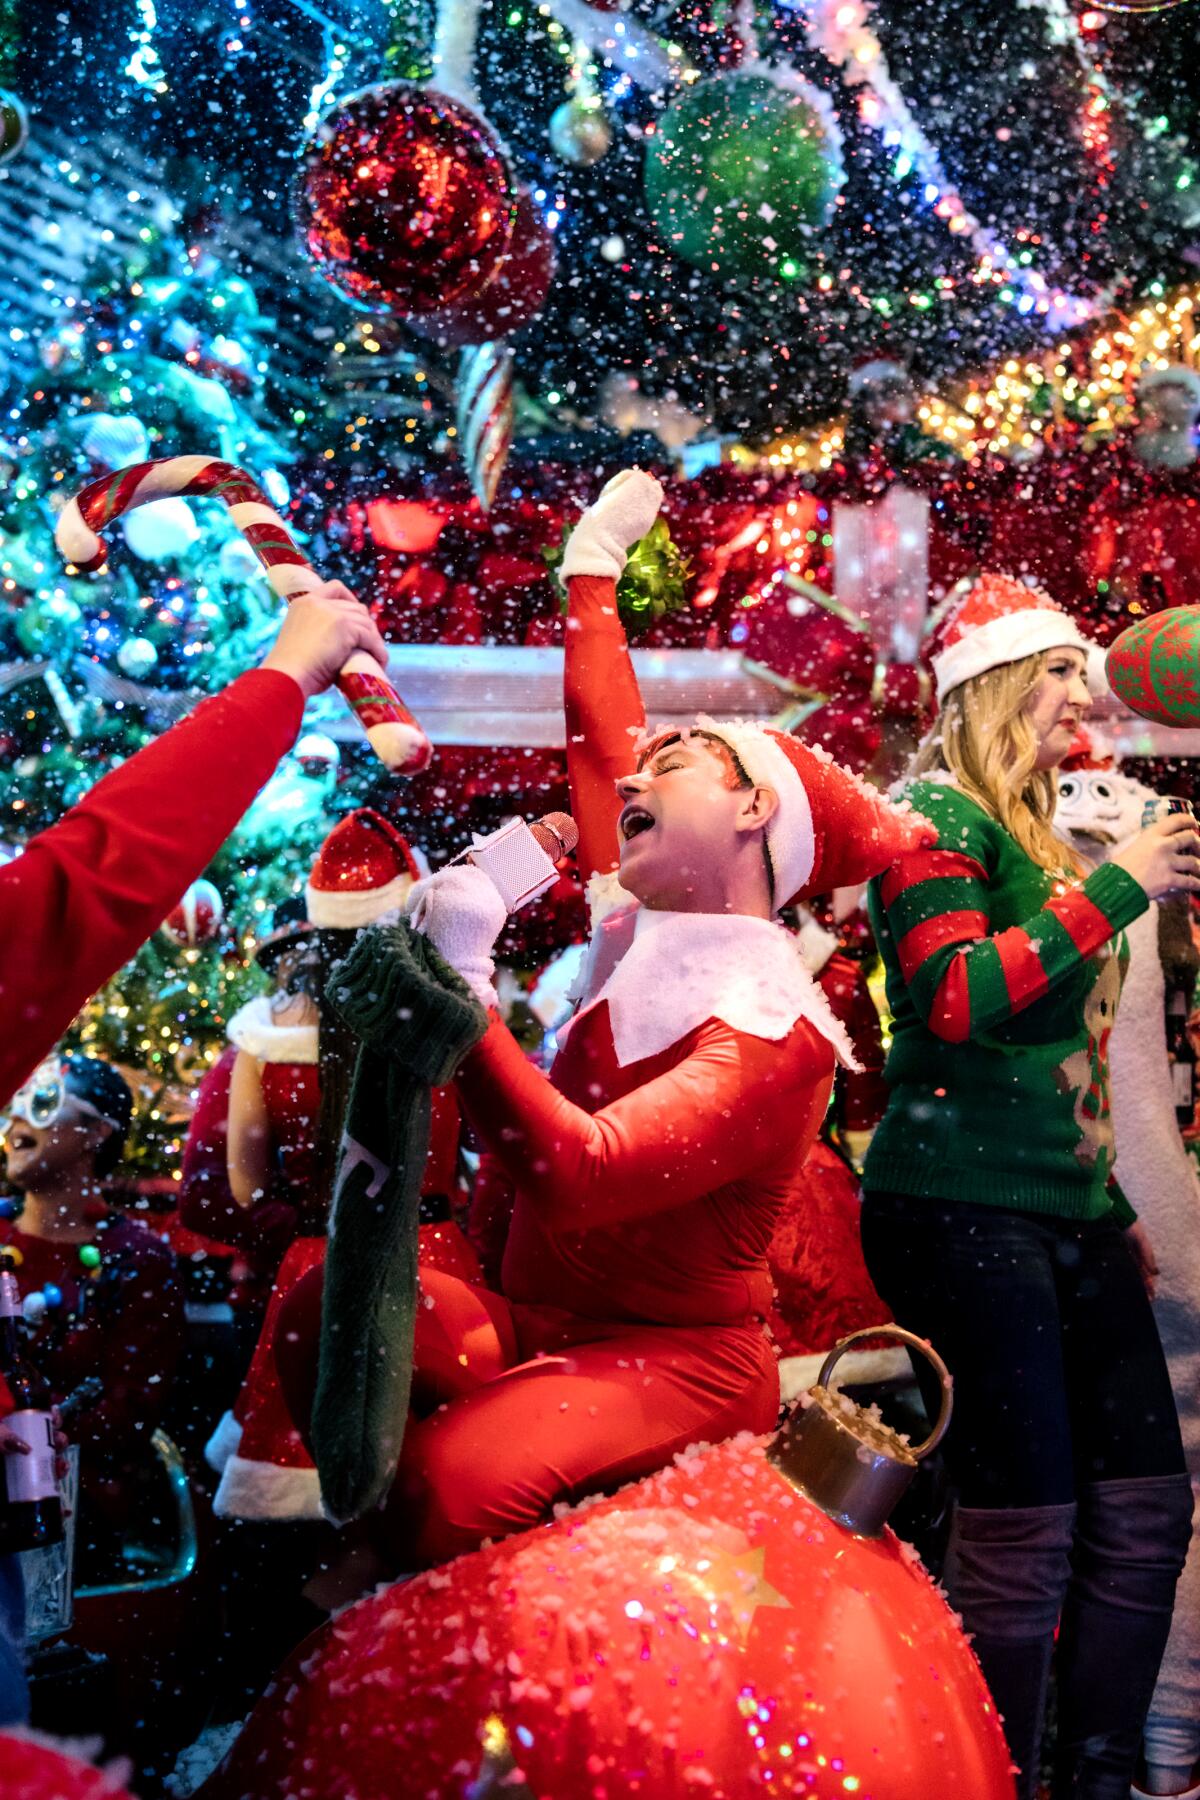 A man dressed as a Christmas elf singing atop a giant ornament at a party.